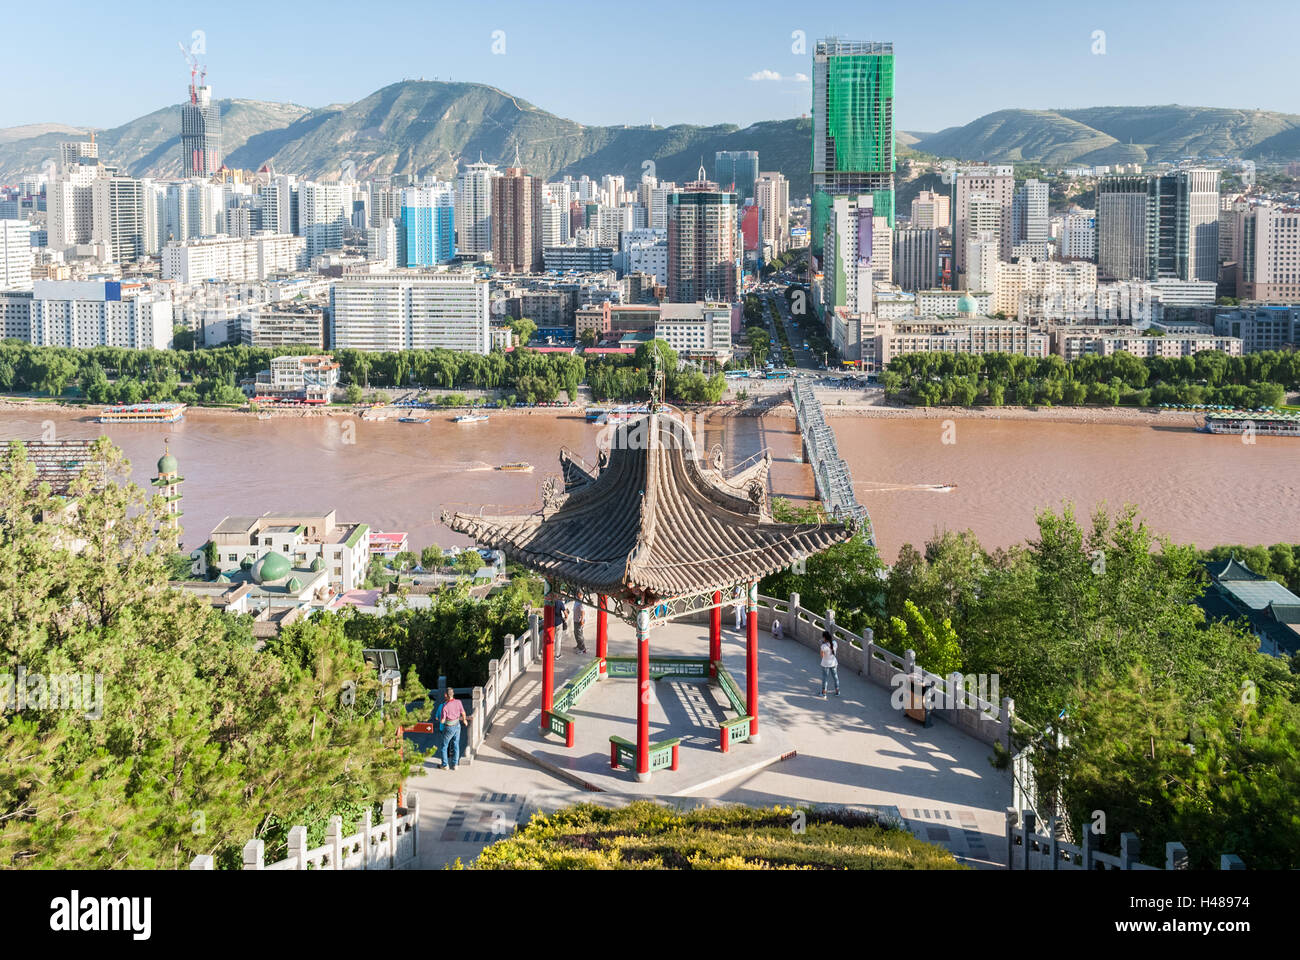 Panoramic view of Lanzhou (China) with a traditional temple in the foreground Stock Photo